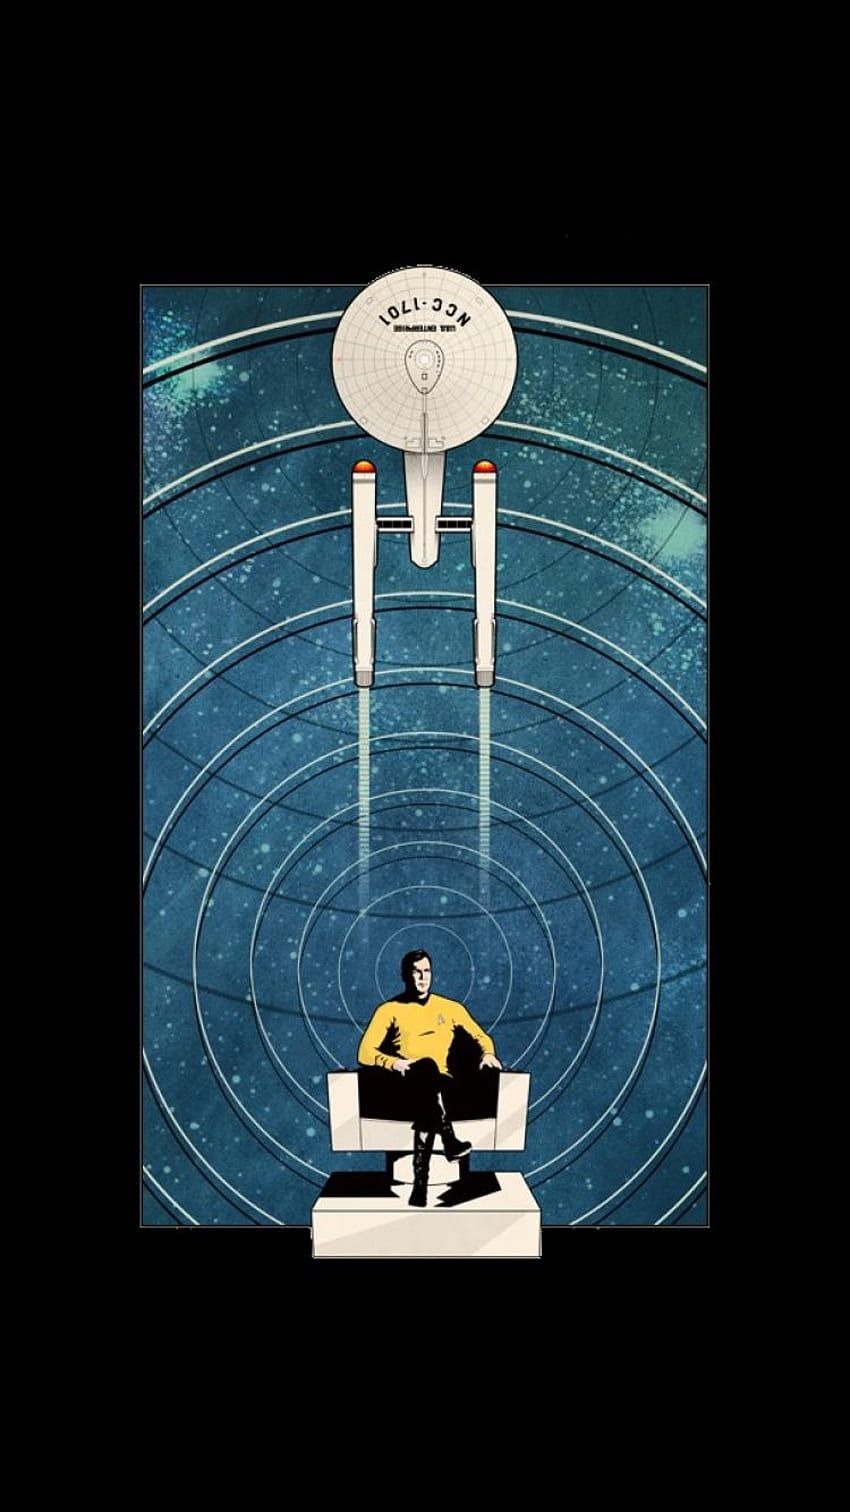 Captain Kirk sitting on a chair in front of a spaceship - Star Trek